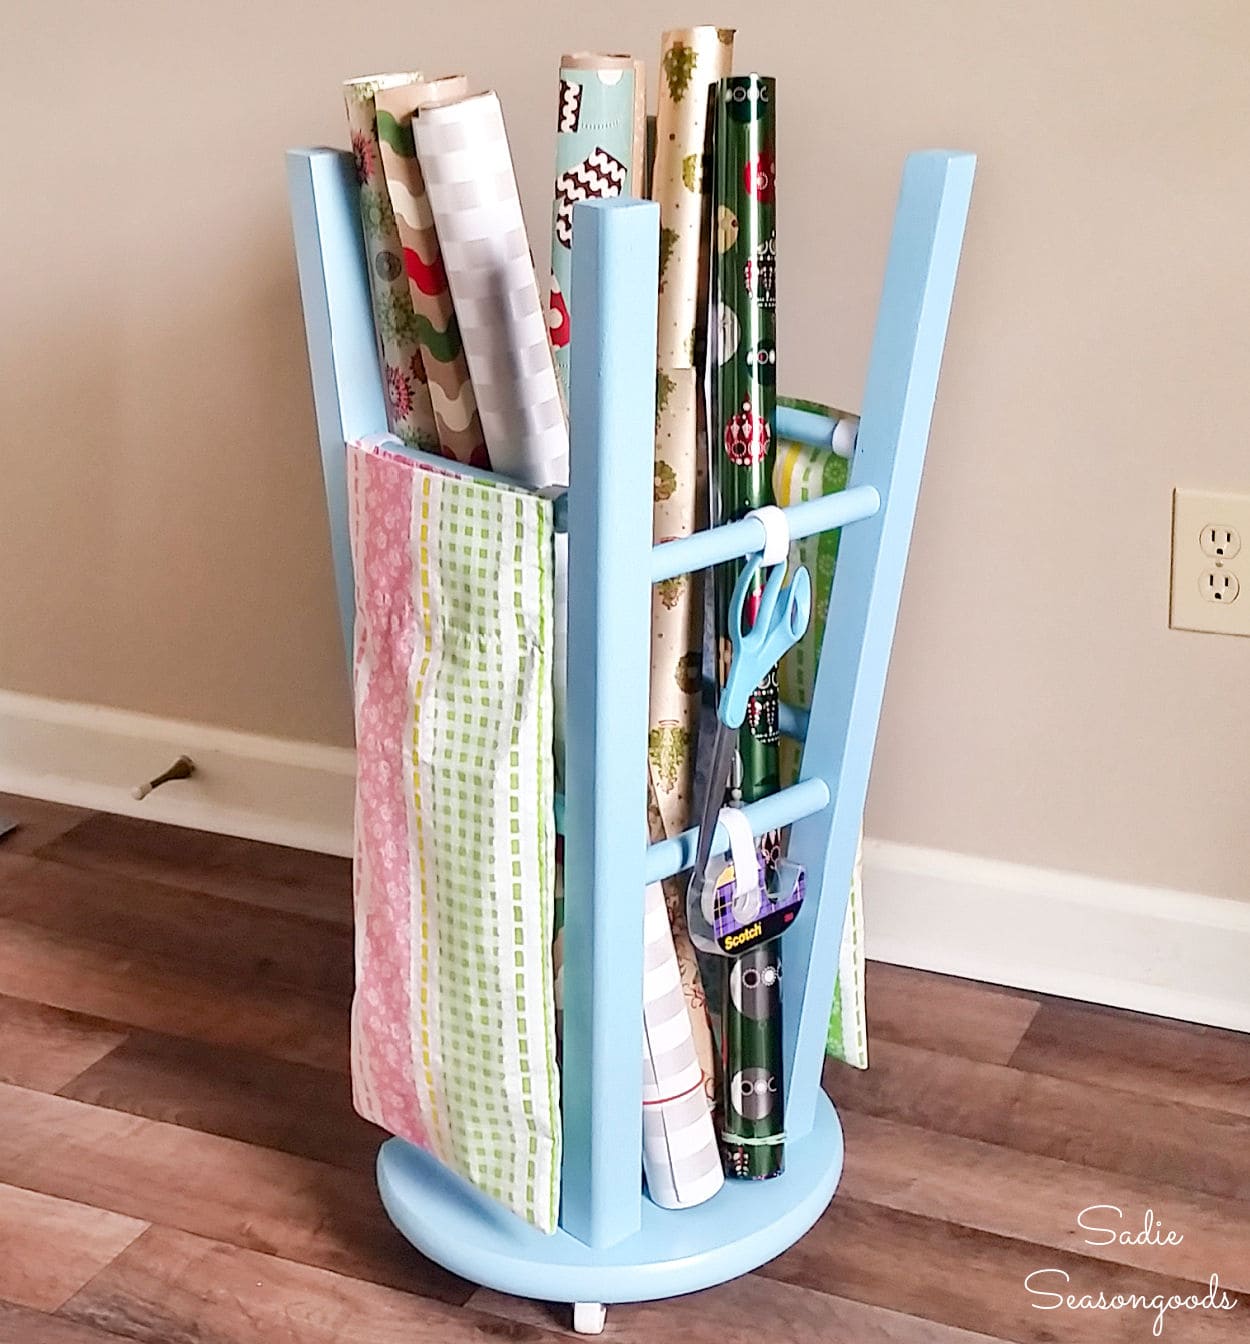 Wrapping Paper Storage Ideas American Greetings Blog | atelier-yuwa.ciao.jp